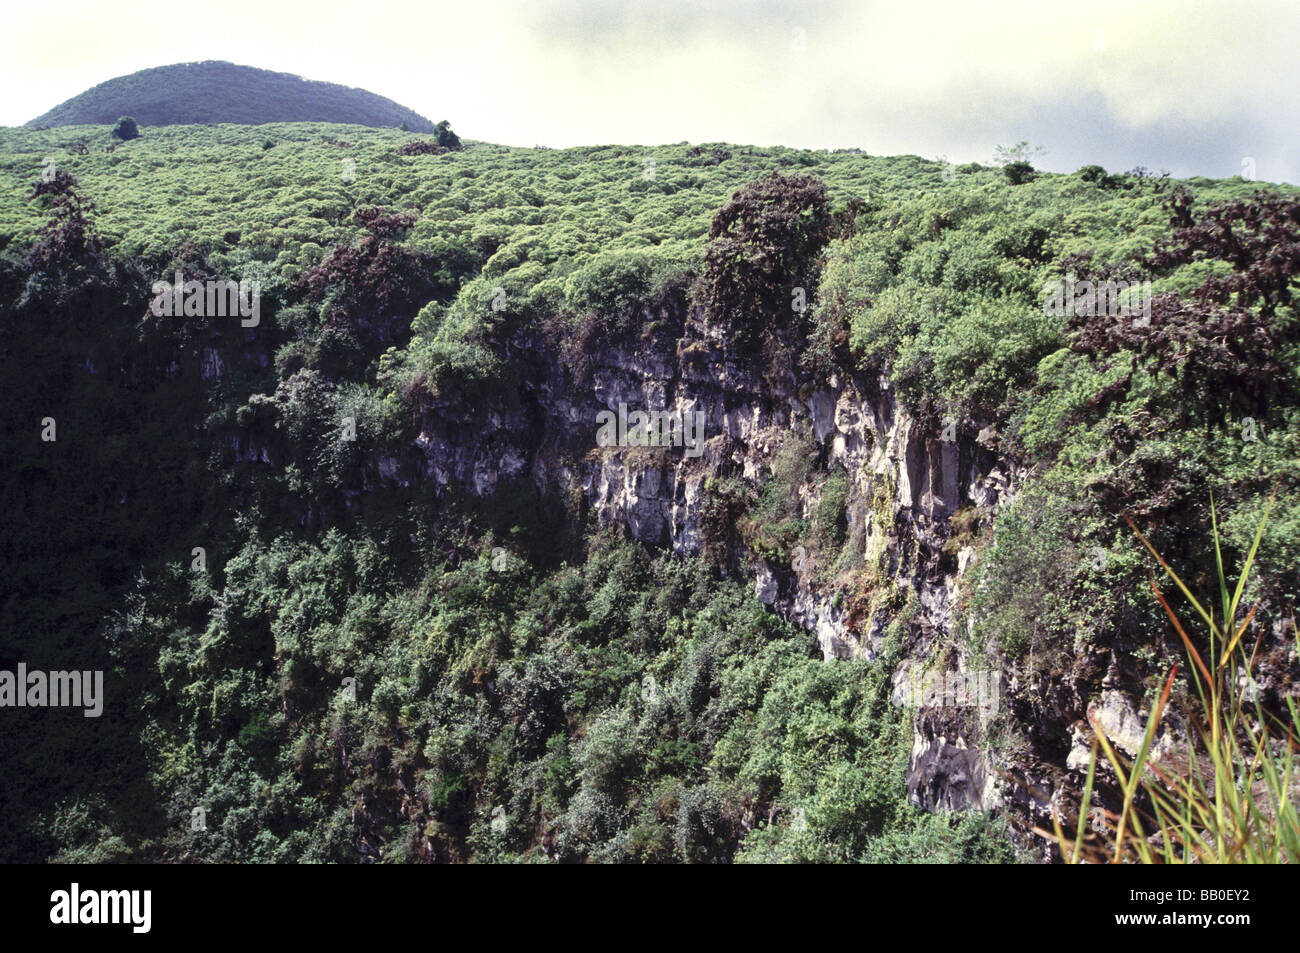 Galapagos Islands.Santa Cruz Island. Pit crater in the cloud-forest which covers a large part of the island. Stock Photo